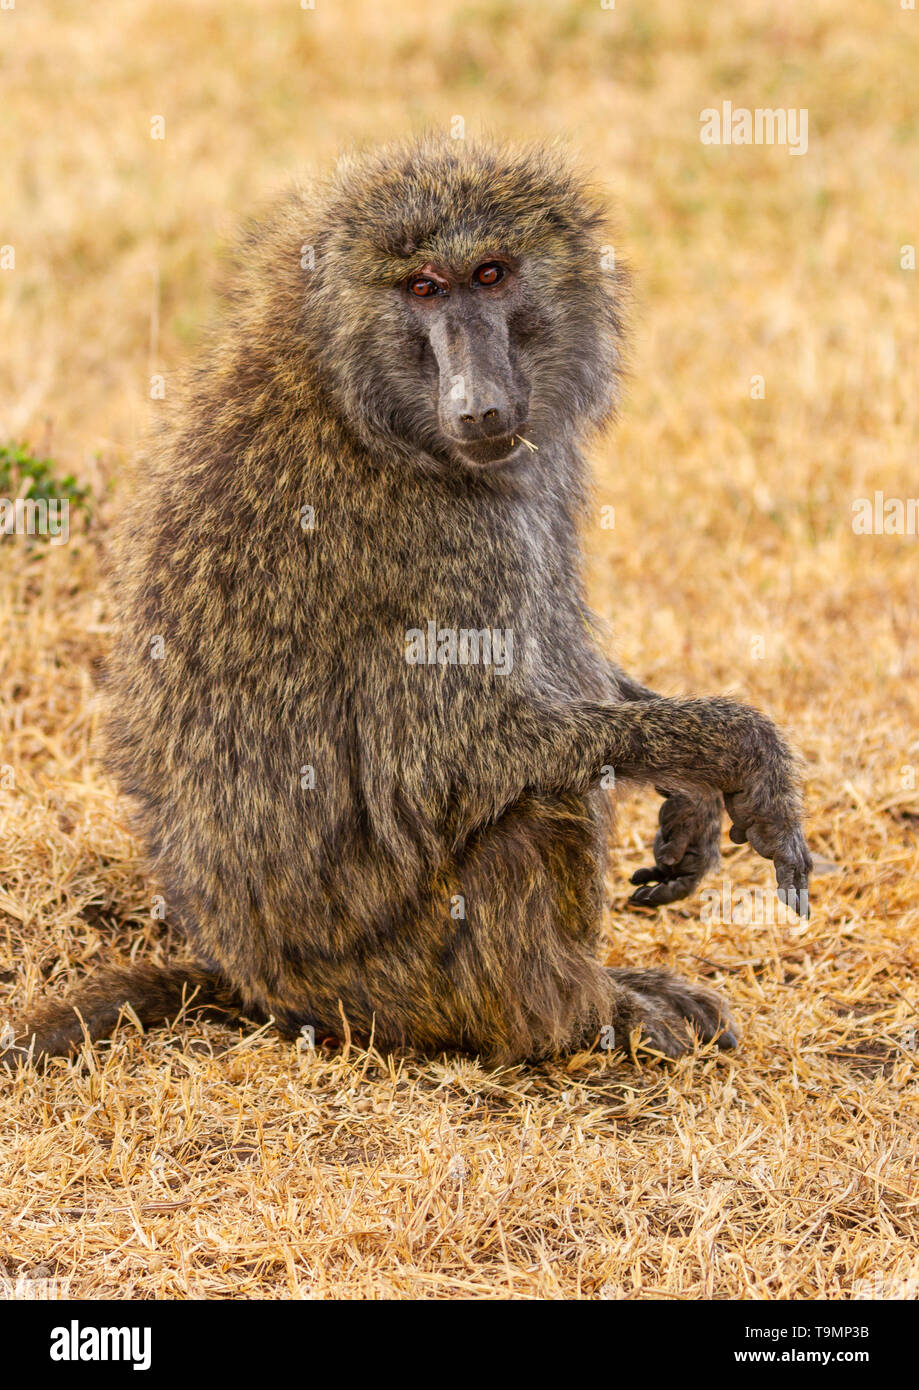 Olive baboon, anubis baboon, Papio anubis, close-up side view face body hands, Ol Pejeta Conservancy, Kenya, East Africa. Texture of hair Stock Photo